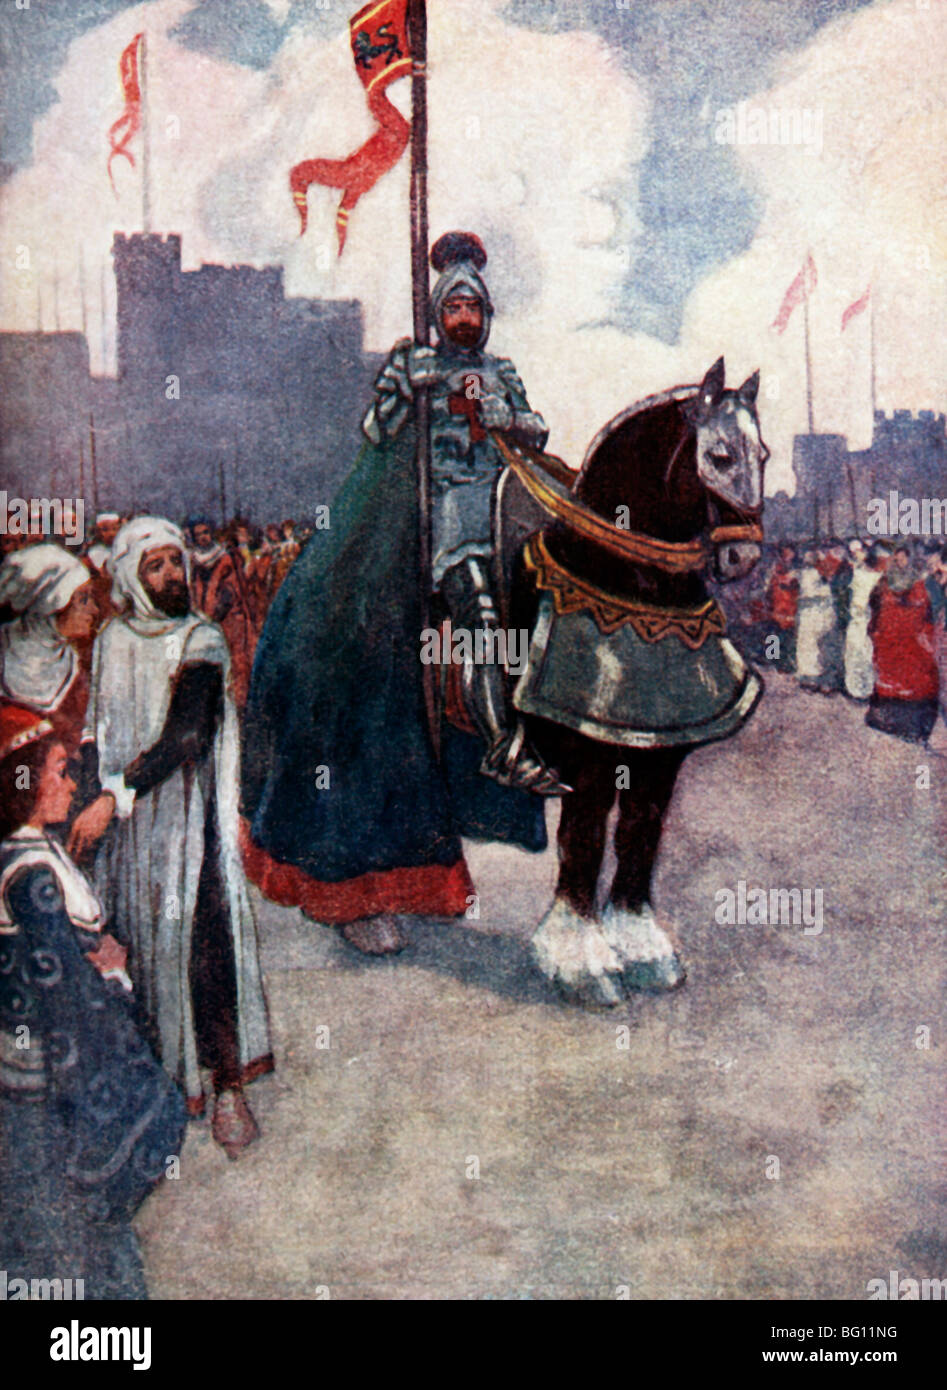 Illustration Of King Richard I Leaving To Fight In The Crusades In Palestine Illustration Stock Photo